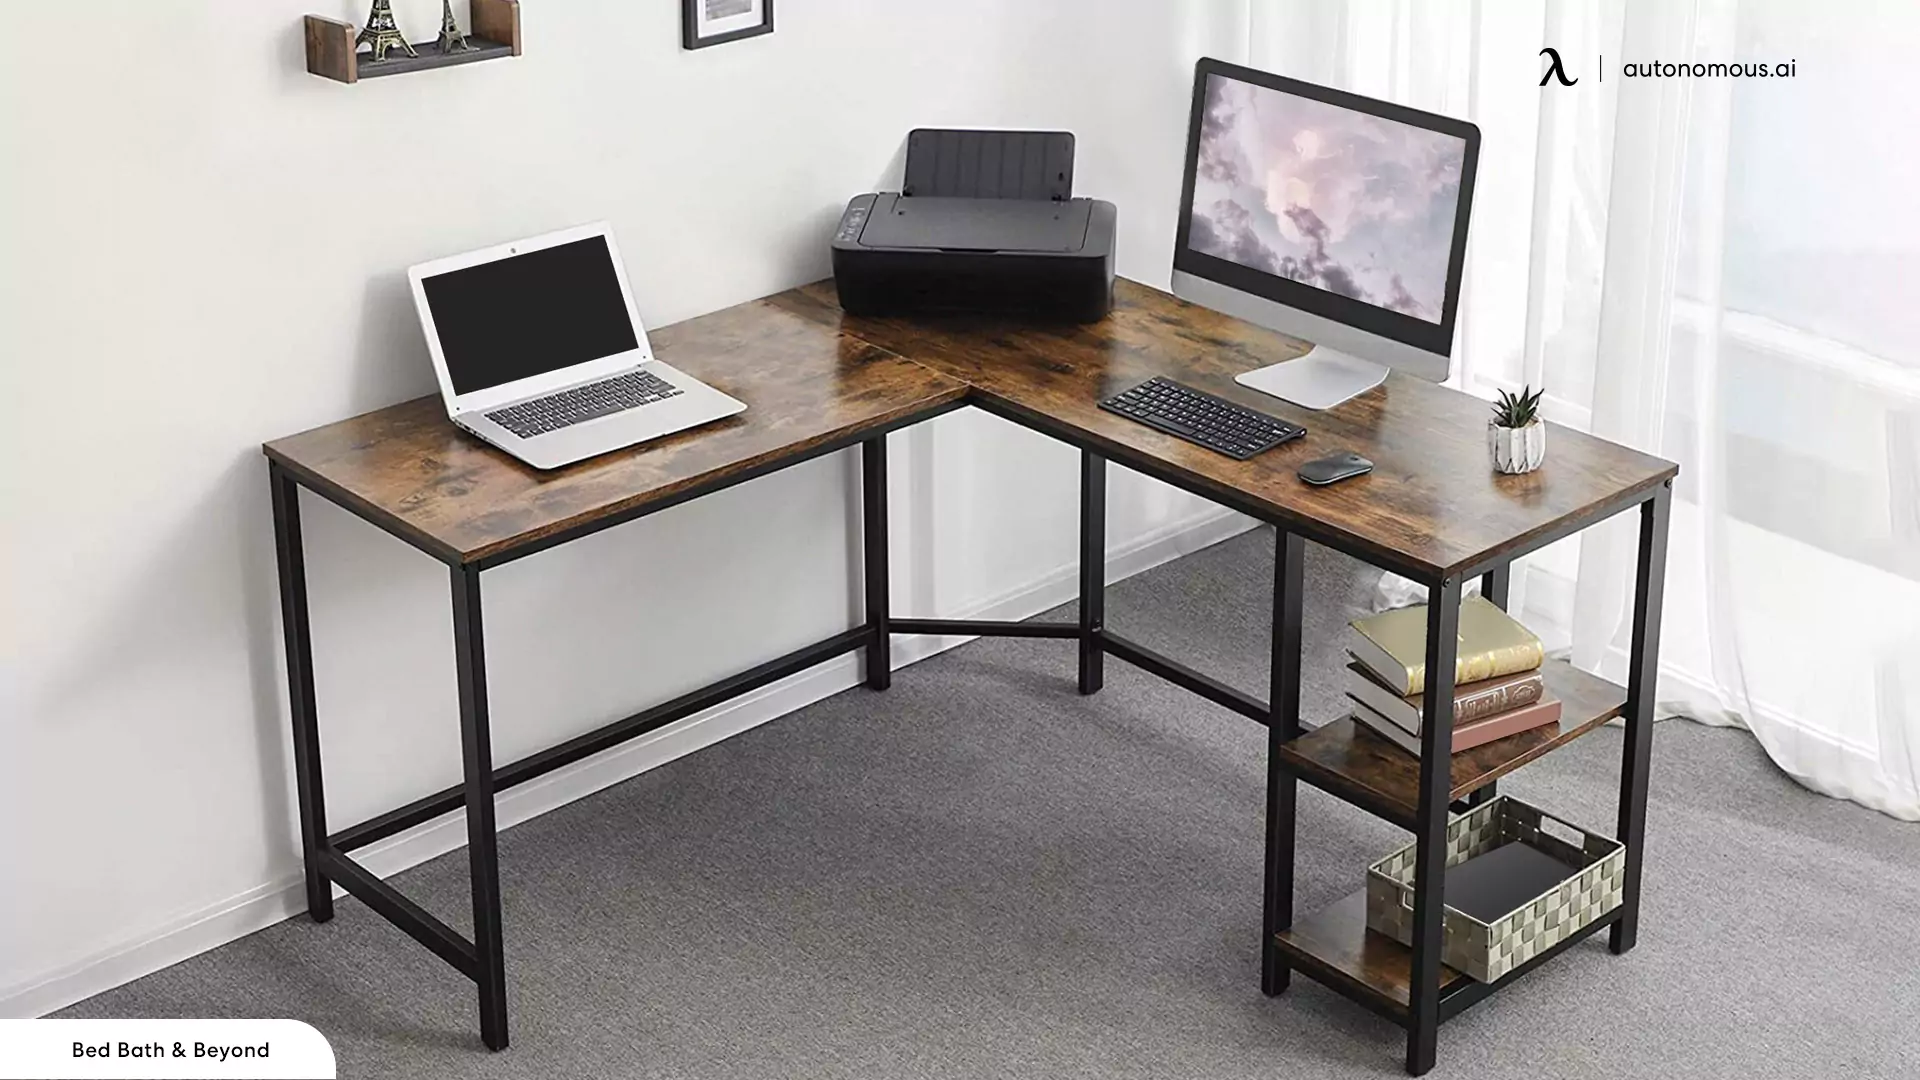 DIY Small Wood Corner Desk Ideas for Your Home Office